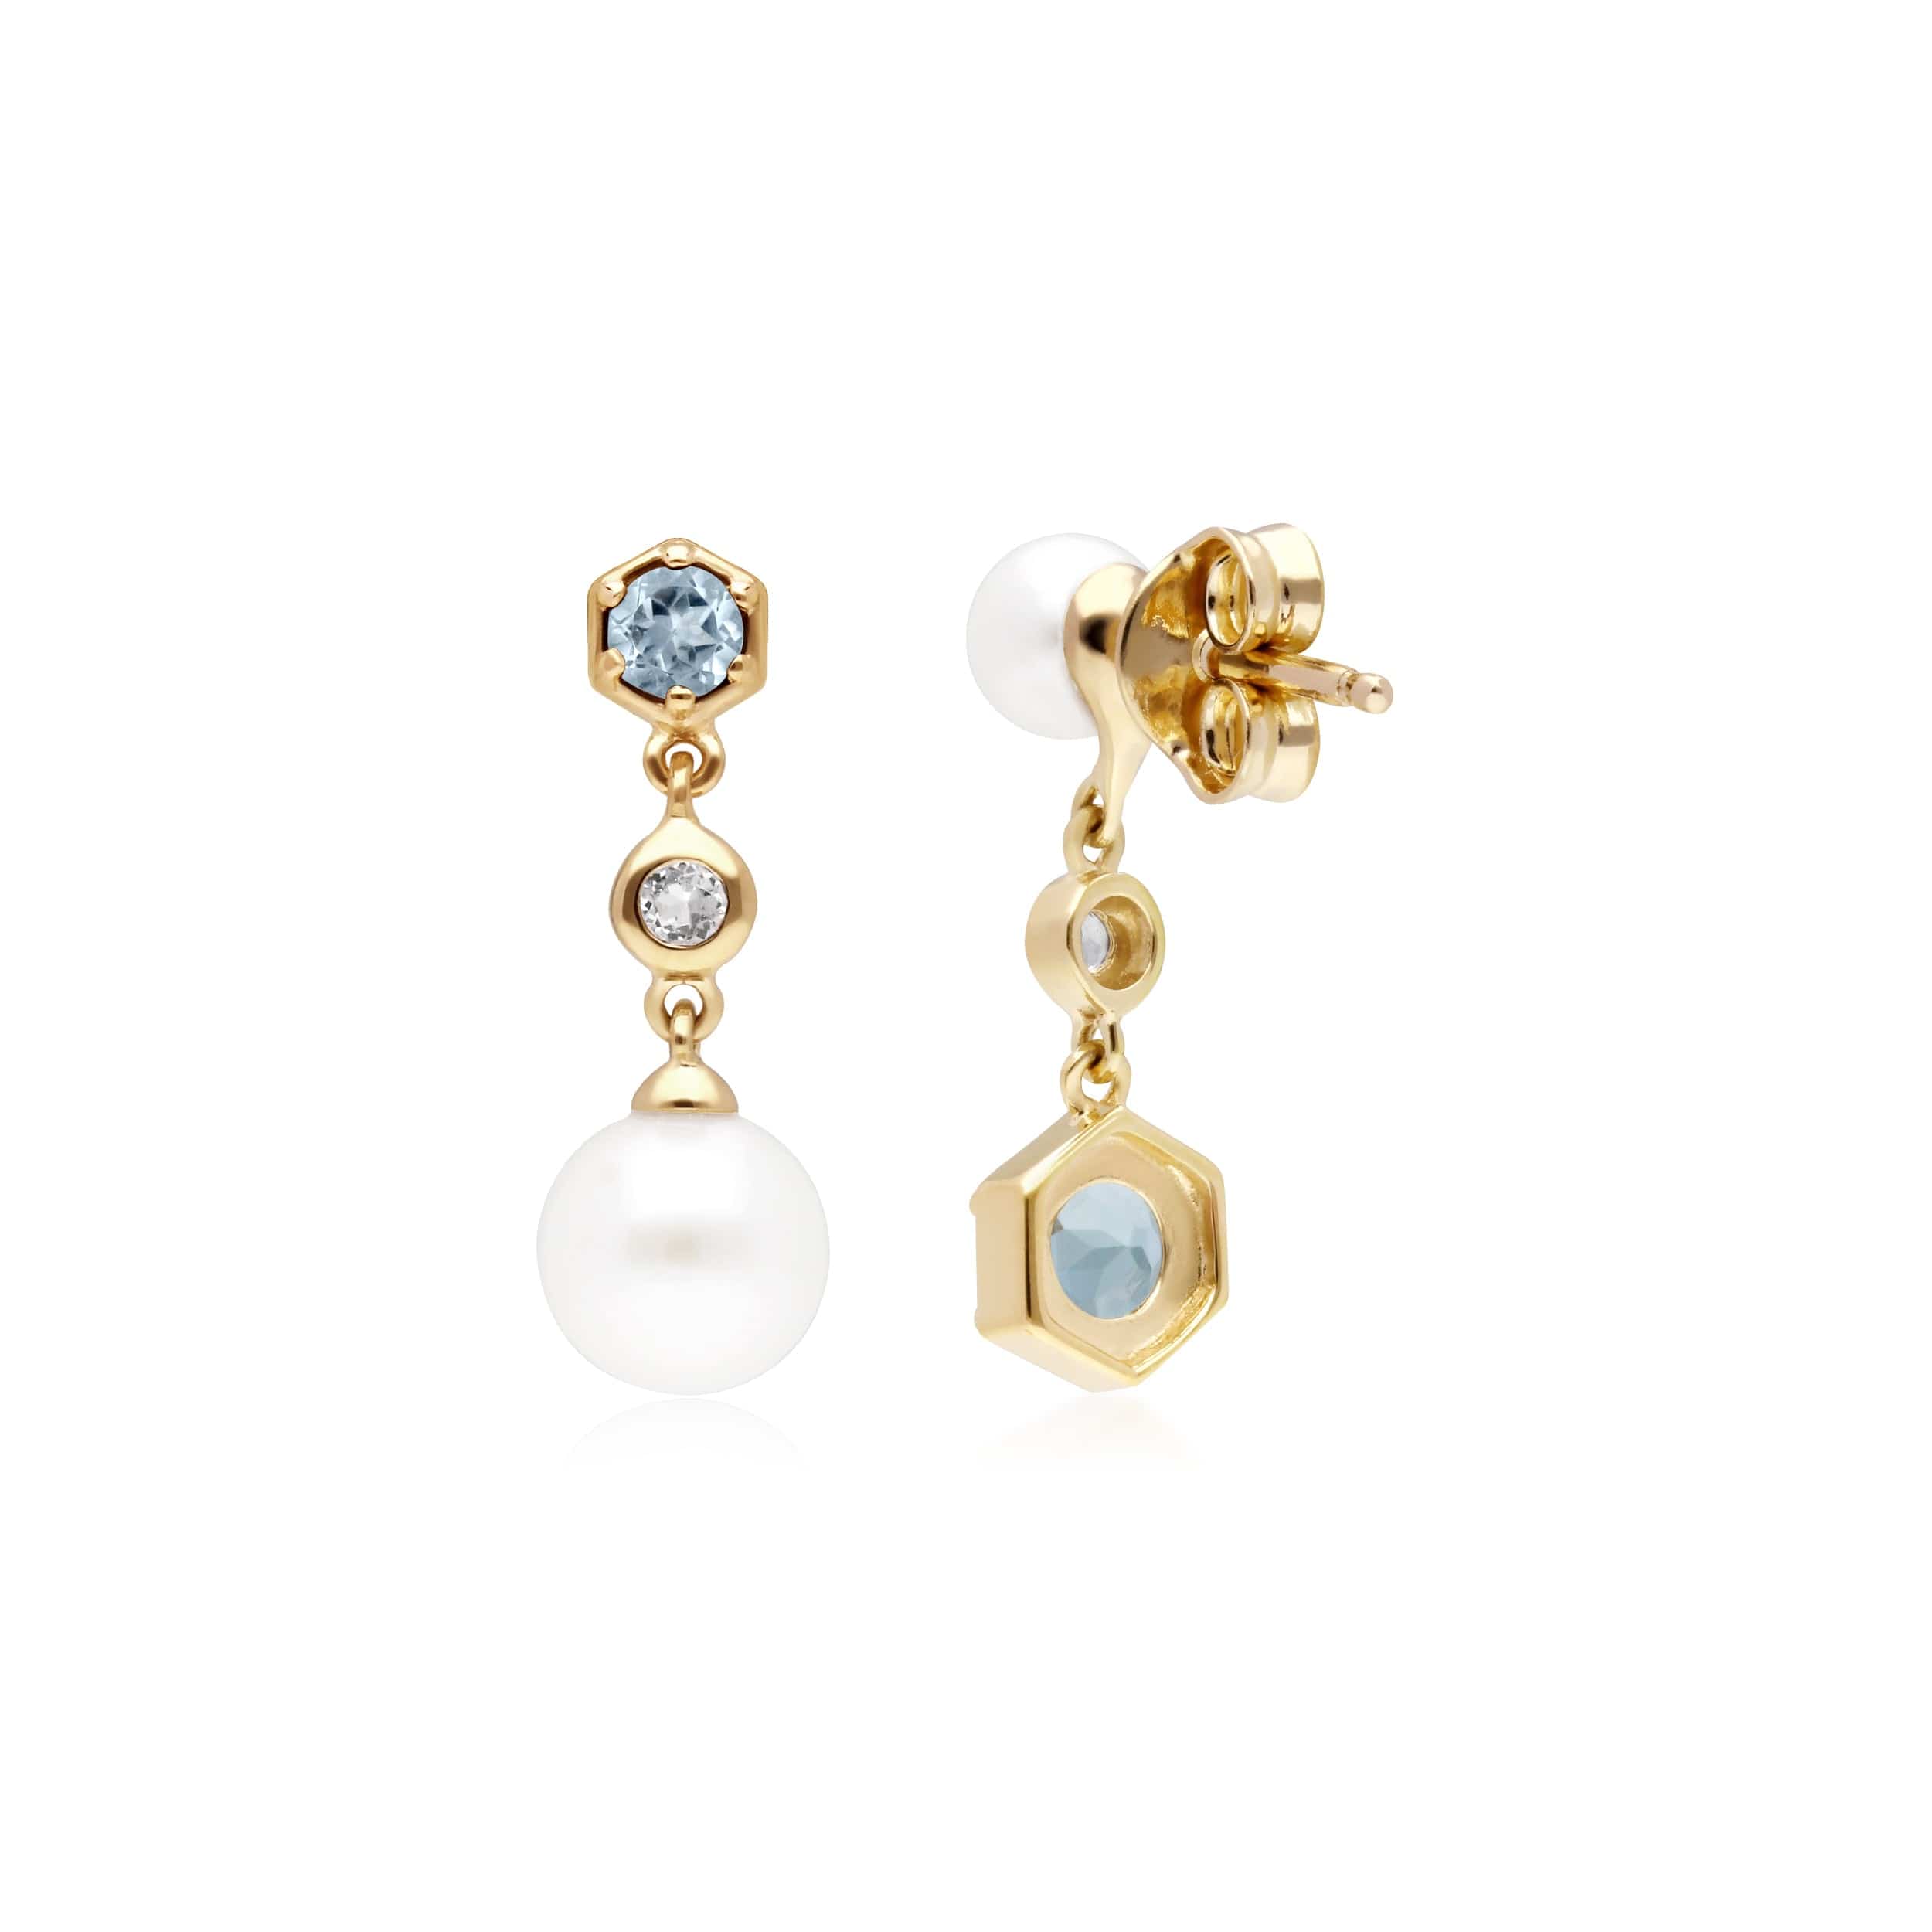 Modern Pearl, Aquamarine & Topaz Mismatched Drop Earrings in Gold Plated Silver - Gemondo